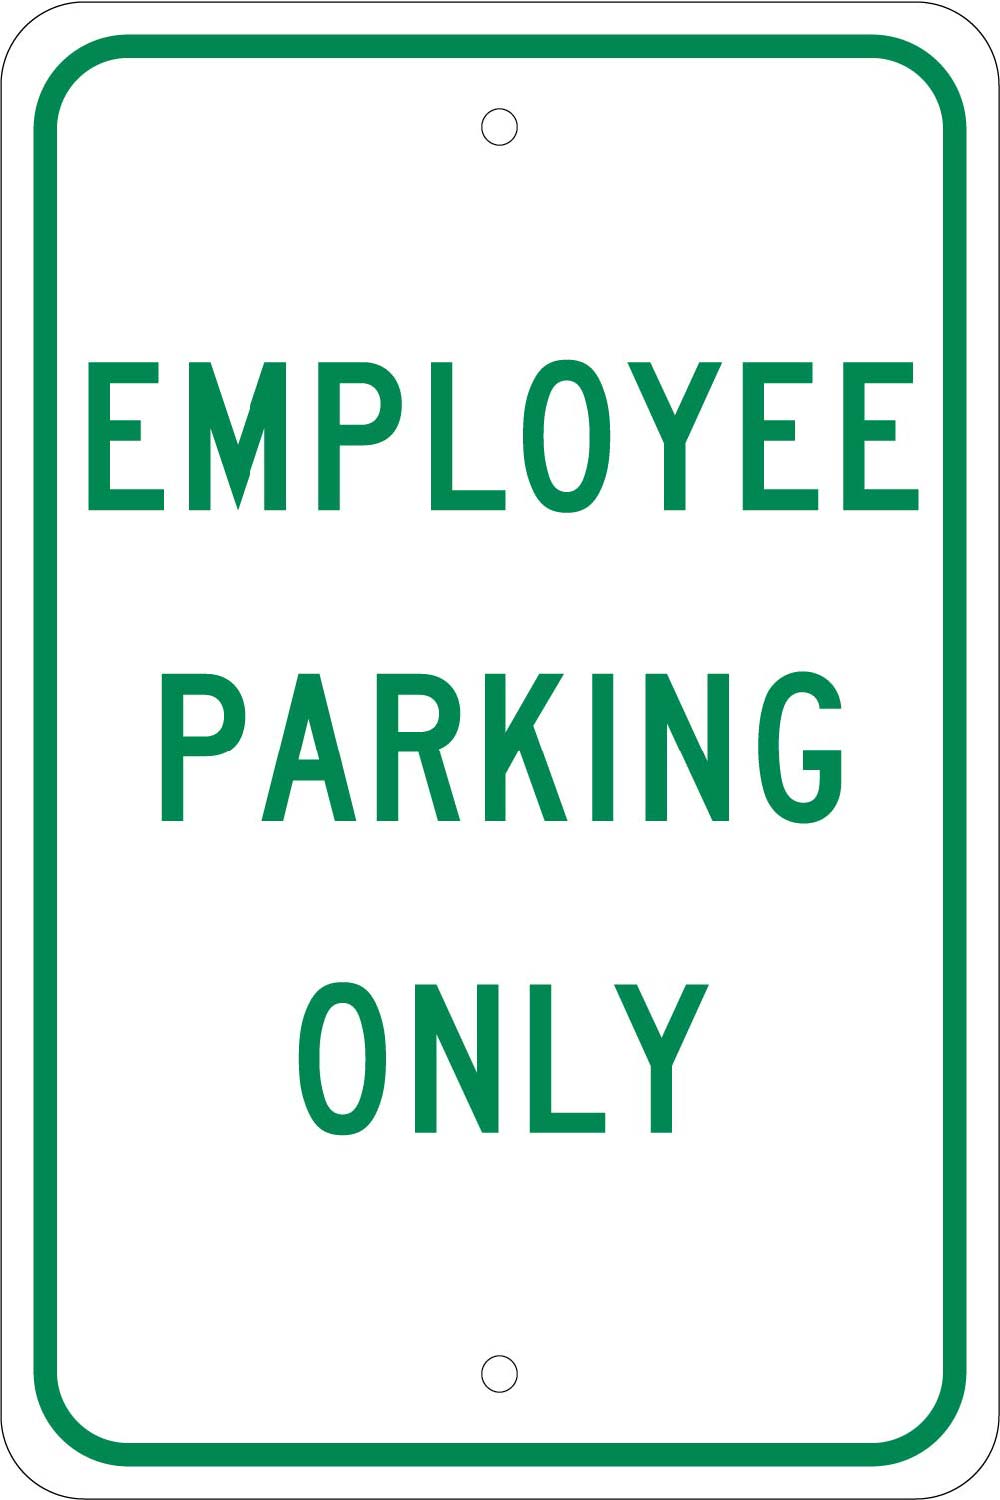 Employee Parking Only Sign-eSafety Supplies, Inc